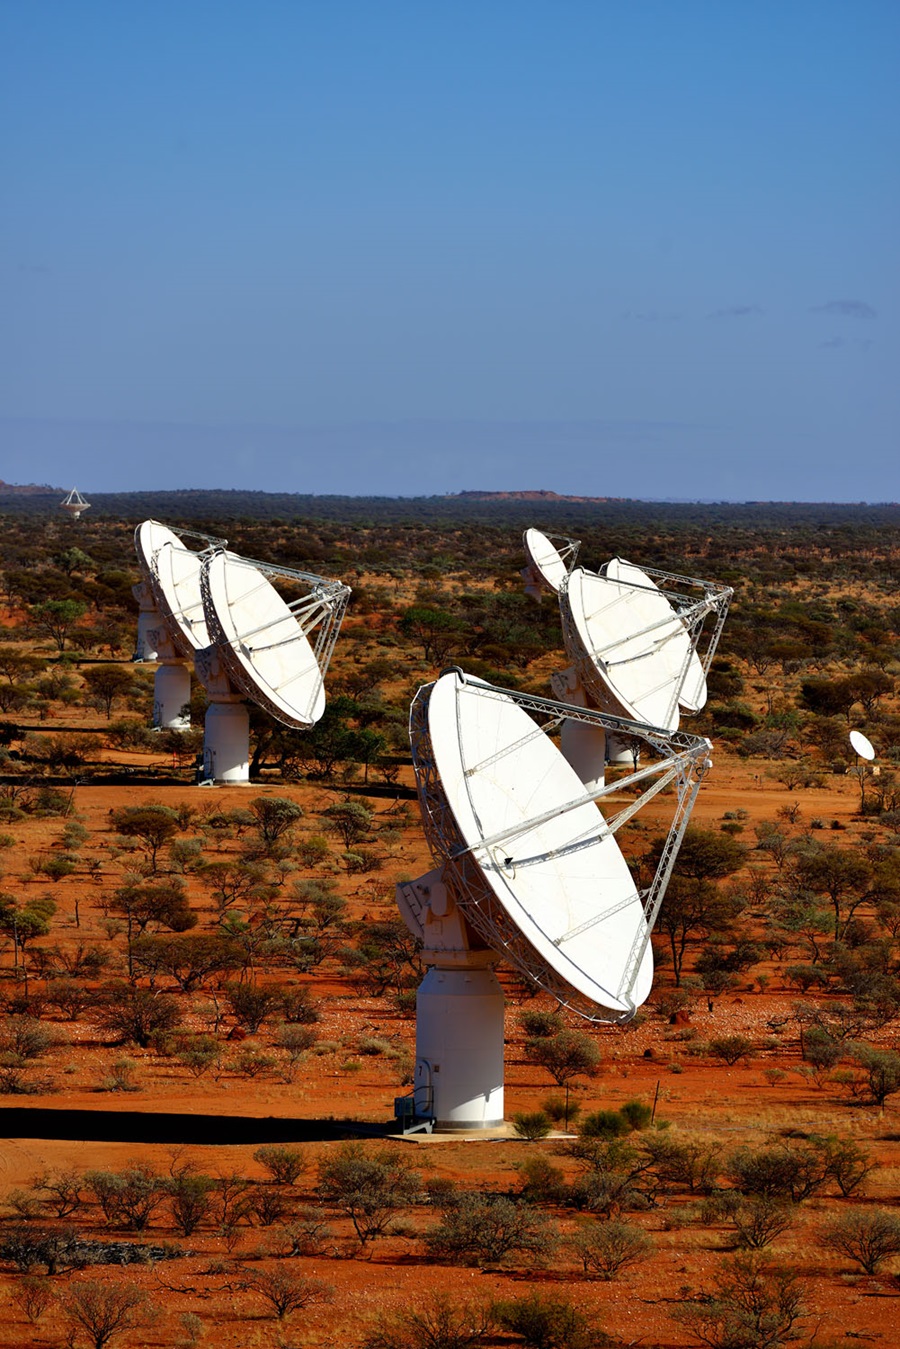 Image shows our ASKAP radio telescope, several dish-like antennas pointing at the sky